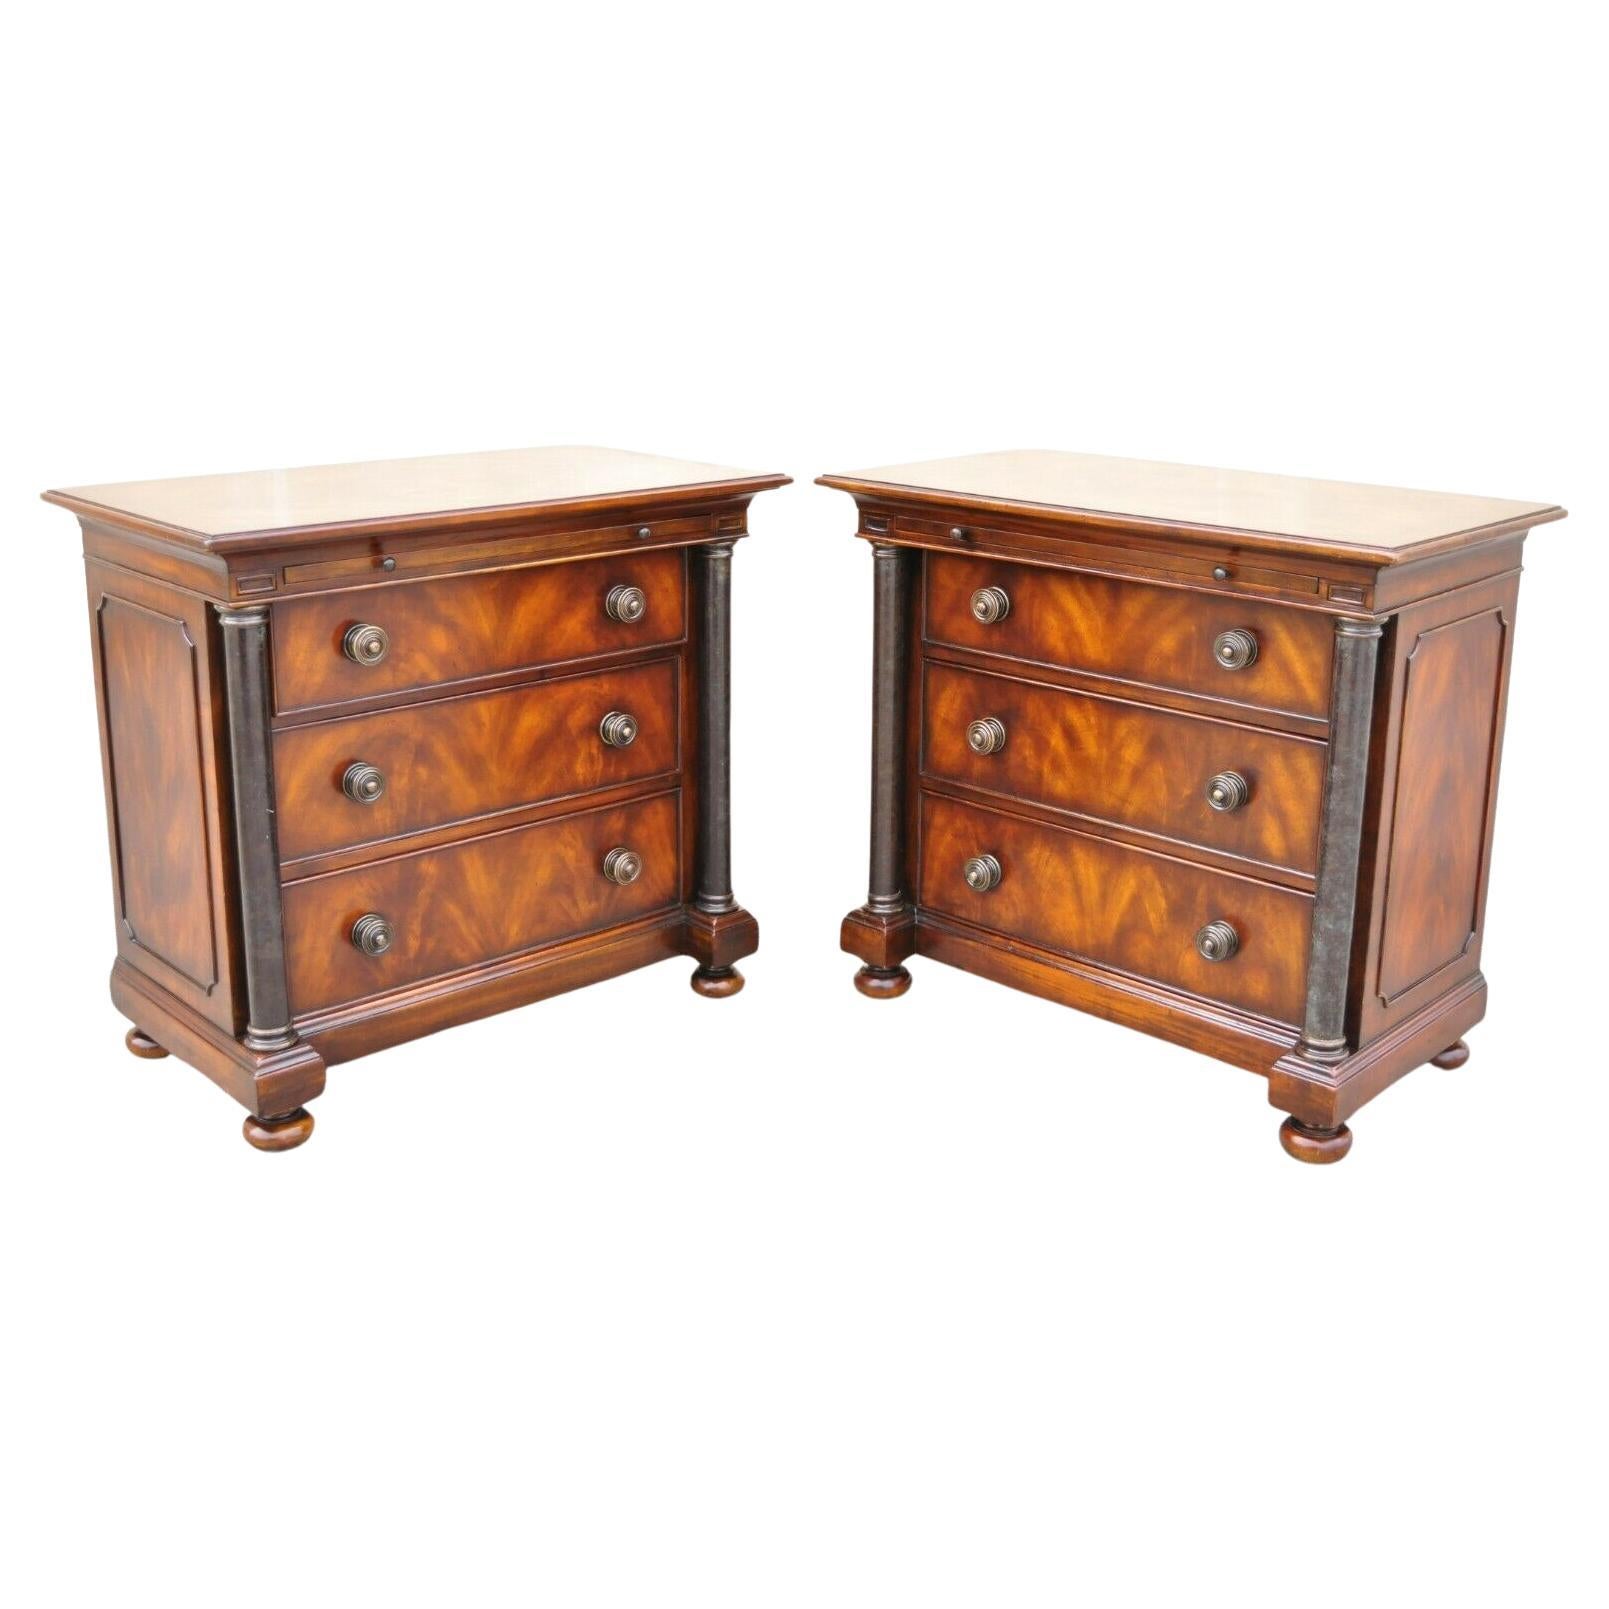 French Empire Style Column and Bun Feet 3 Drawers Nightstand Commode, a Pair